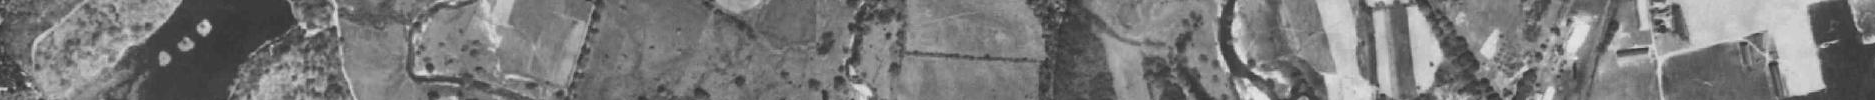 1934 Historic Aerial Photography